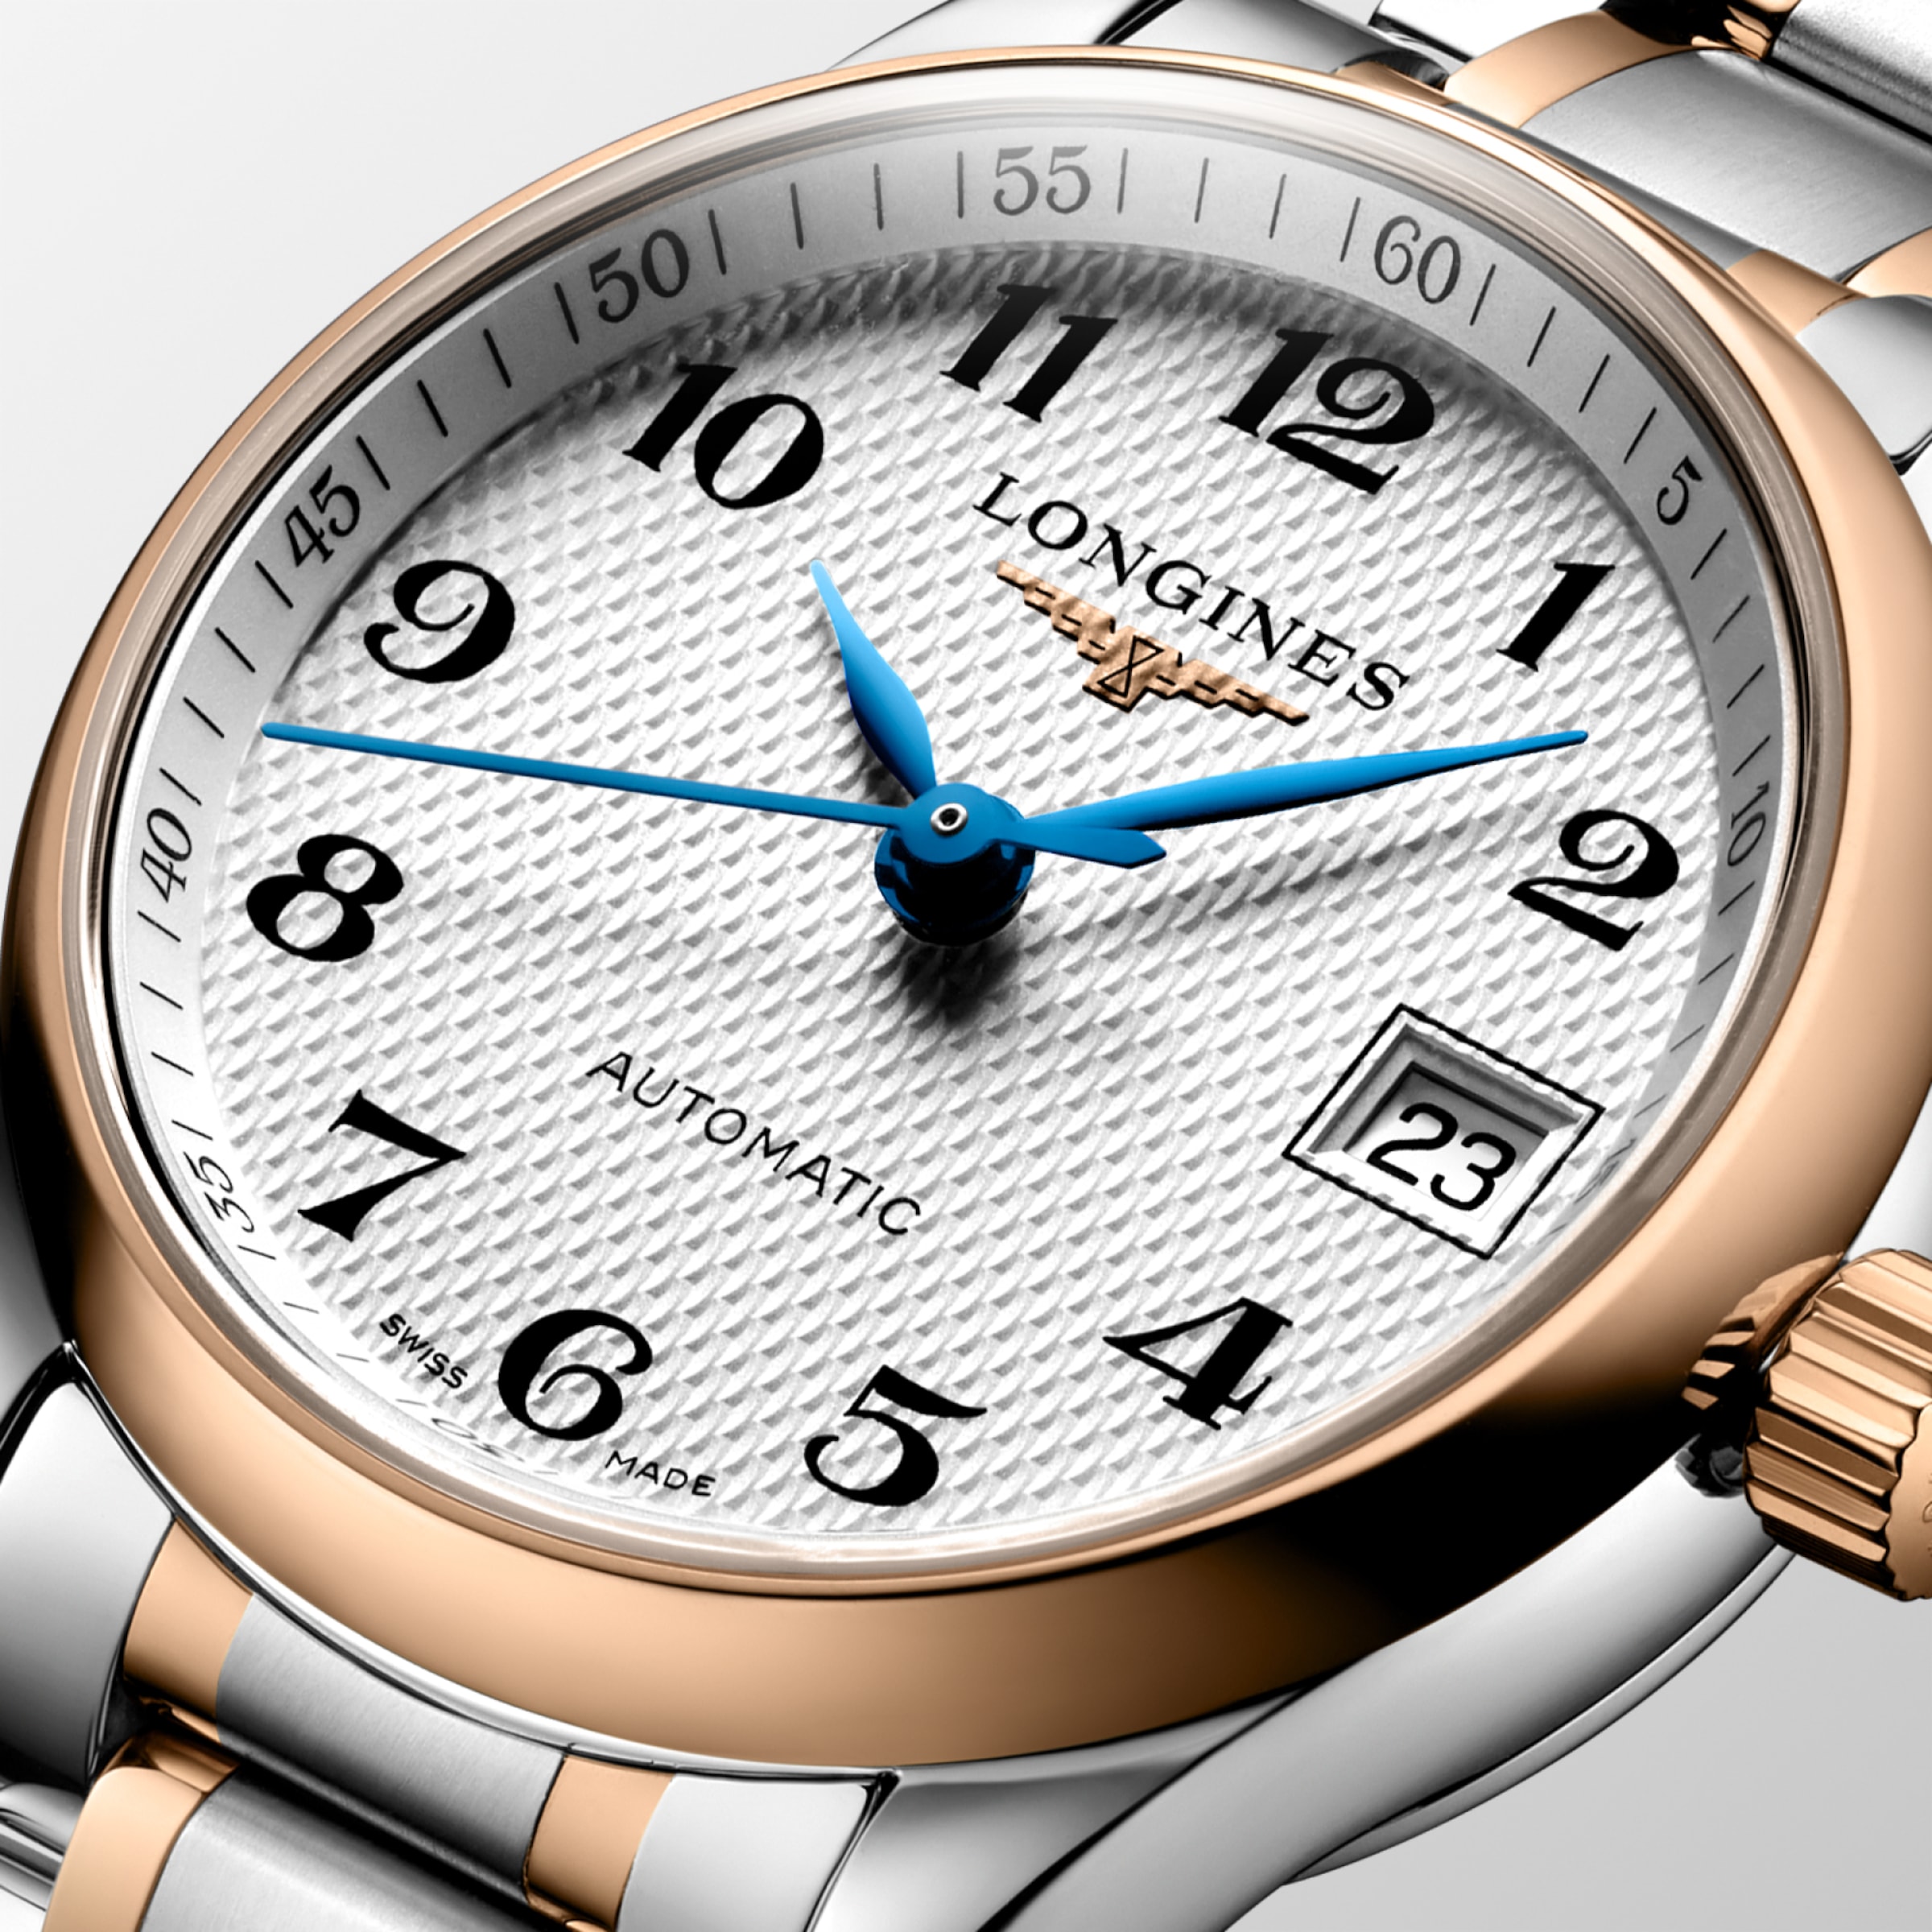 Longines MASTER COLLECTION Automatic Stainless steel and 18 karat pink gold Watch - L2.128.5.79.7